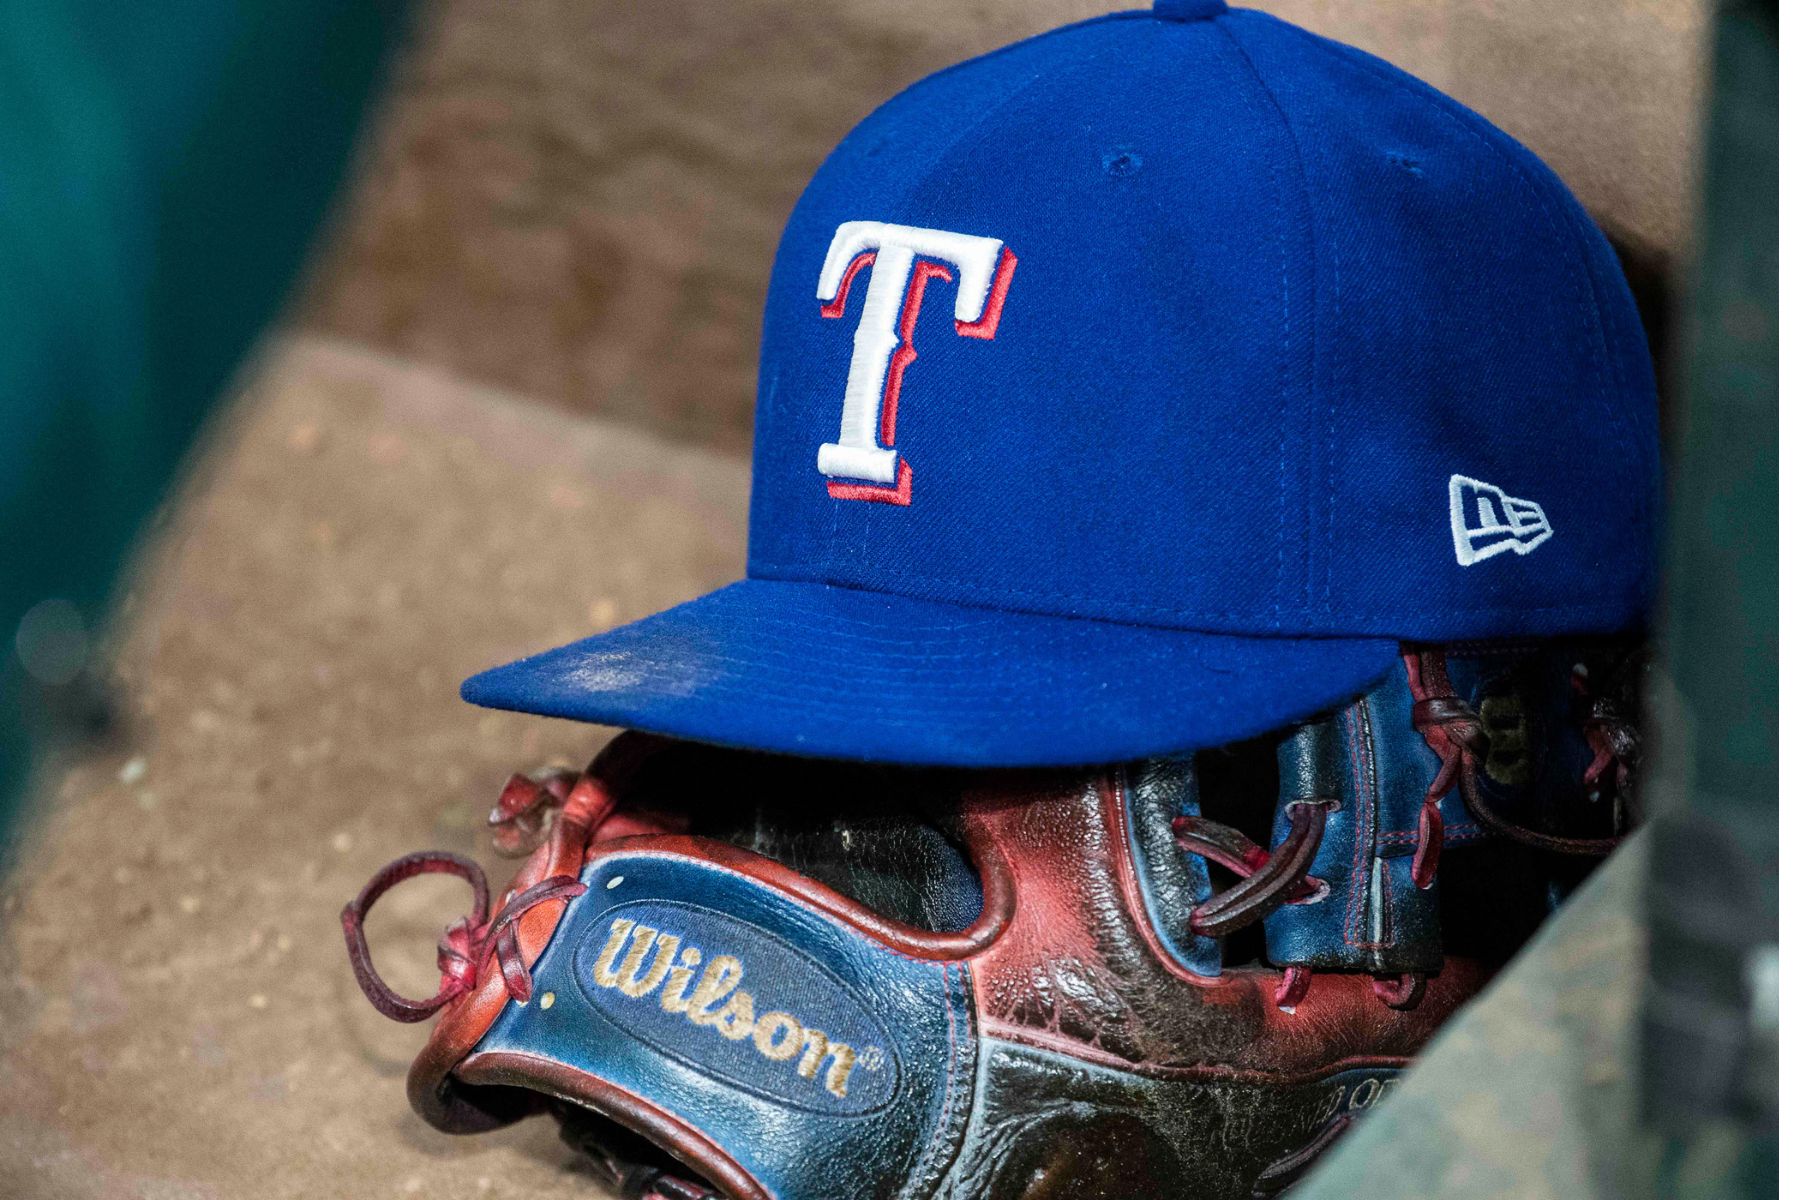 The Rangers' Ongoing Refusal to Hold a Pride Night Is More Than An Outreach  Failure - D Magazine